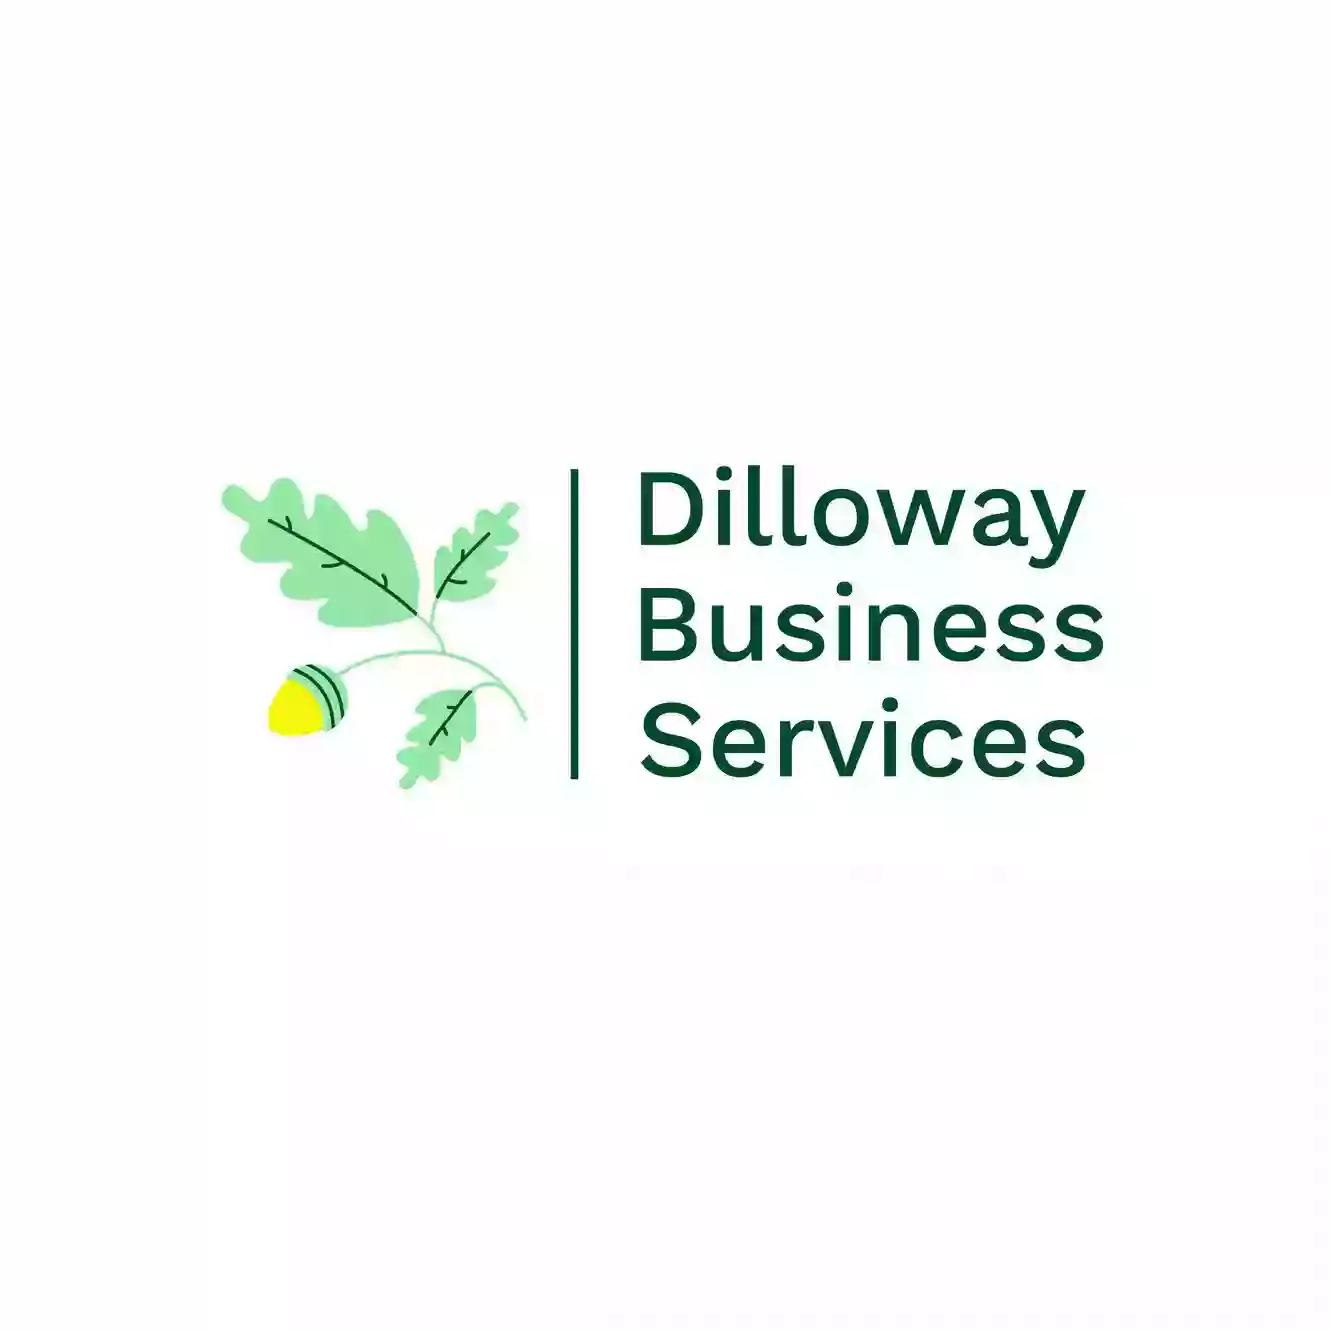 Dilloway Business Services Ltd.